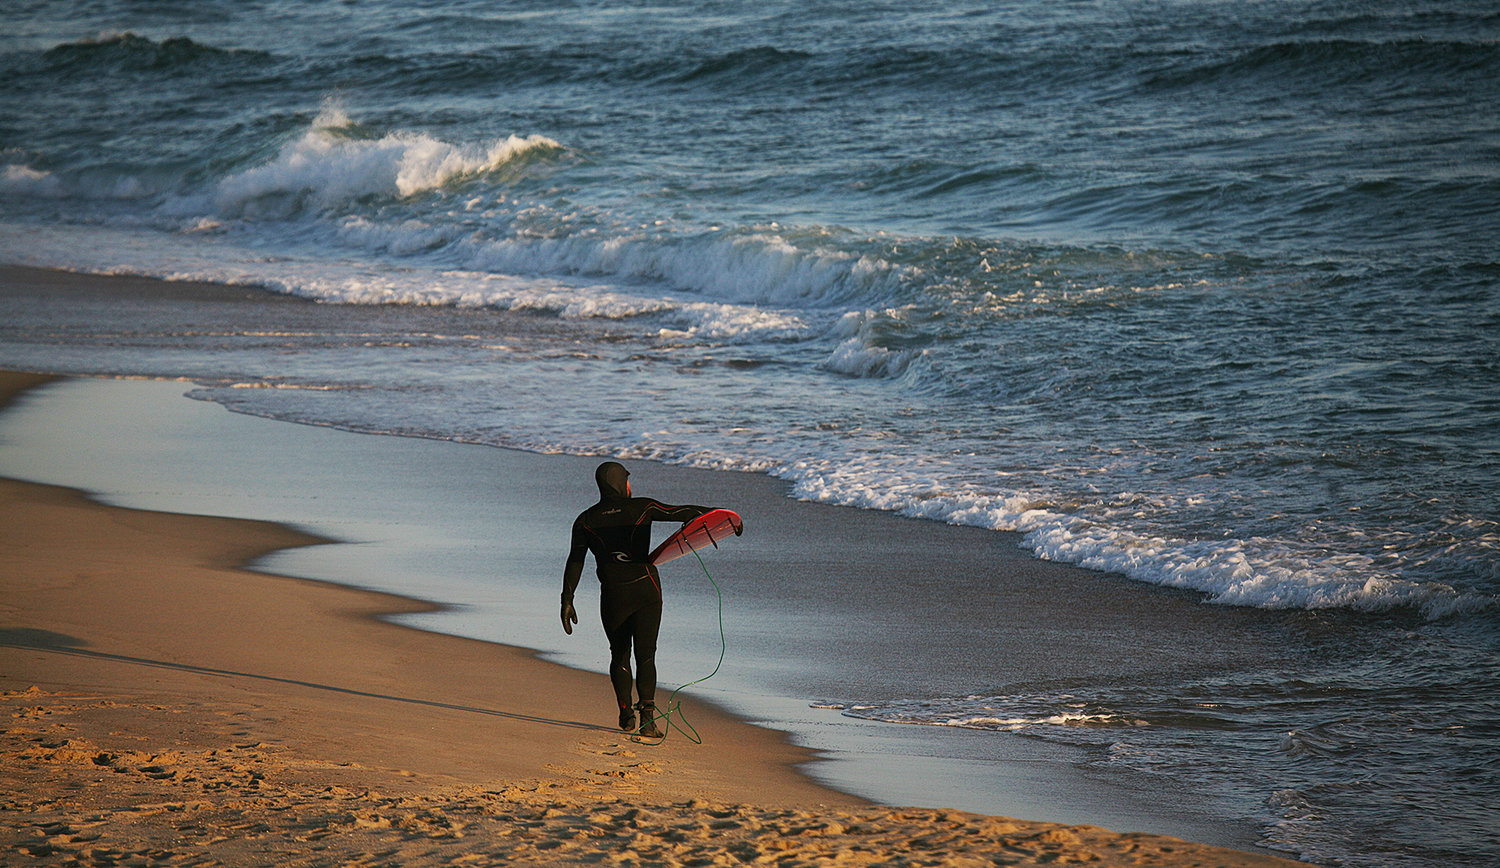 Jeremy Norwood, of Nantucket, carries his board as he heads for the surf at Cisco Beach on Monday.